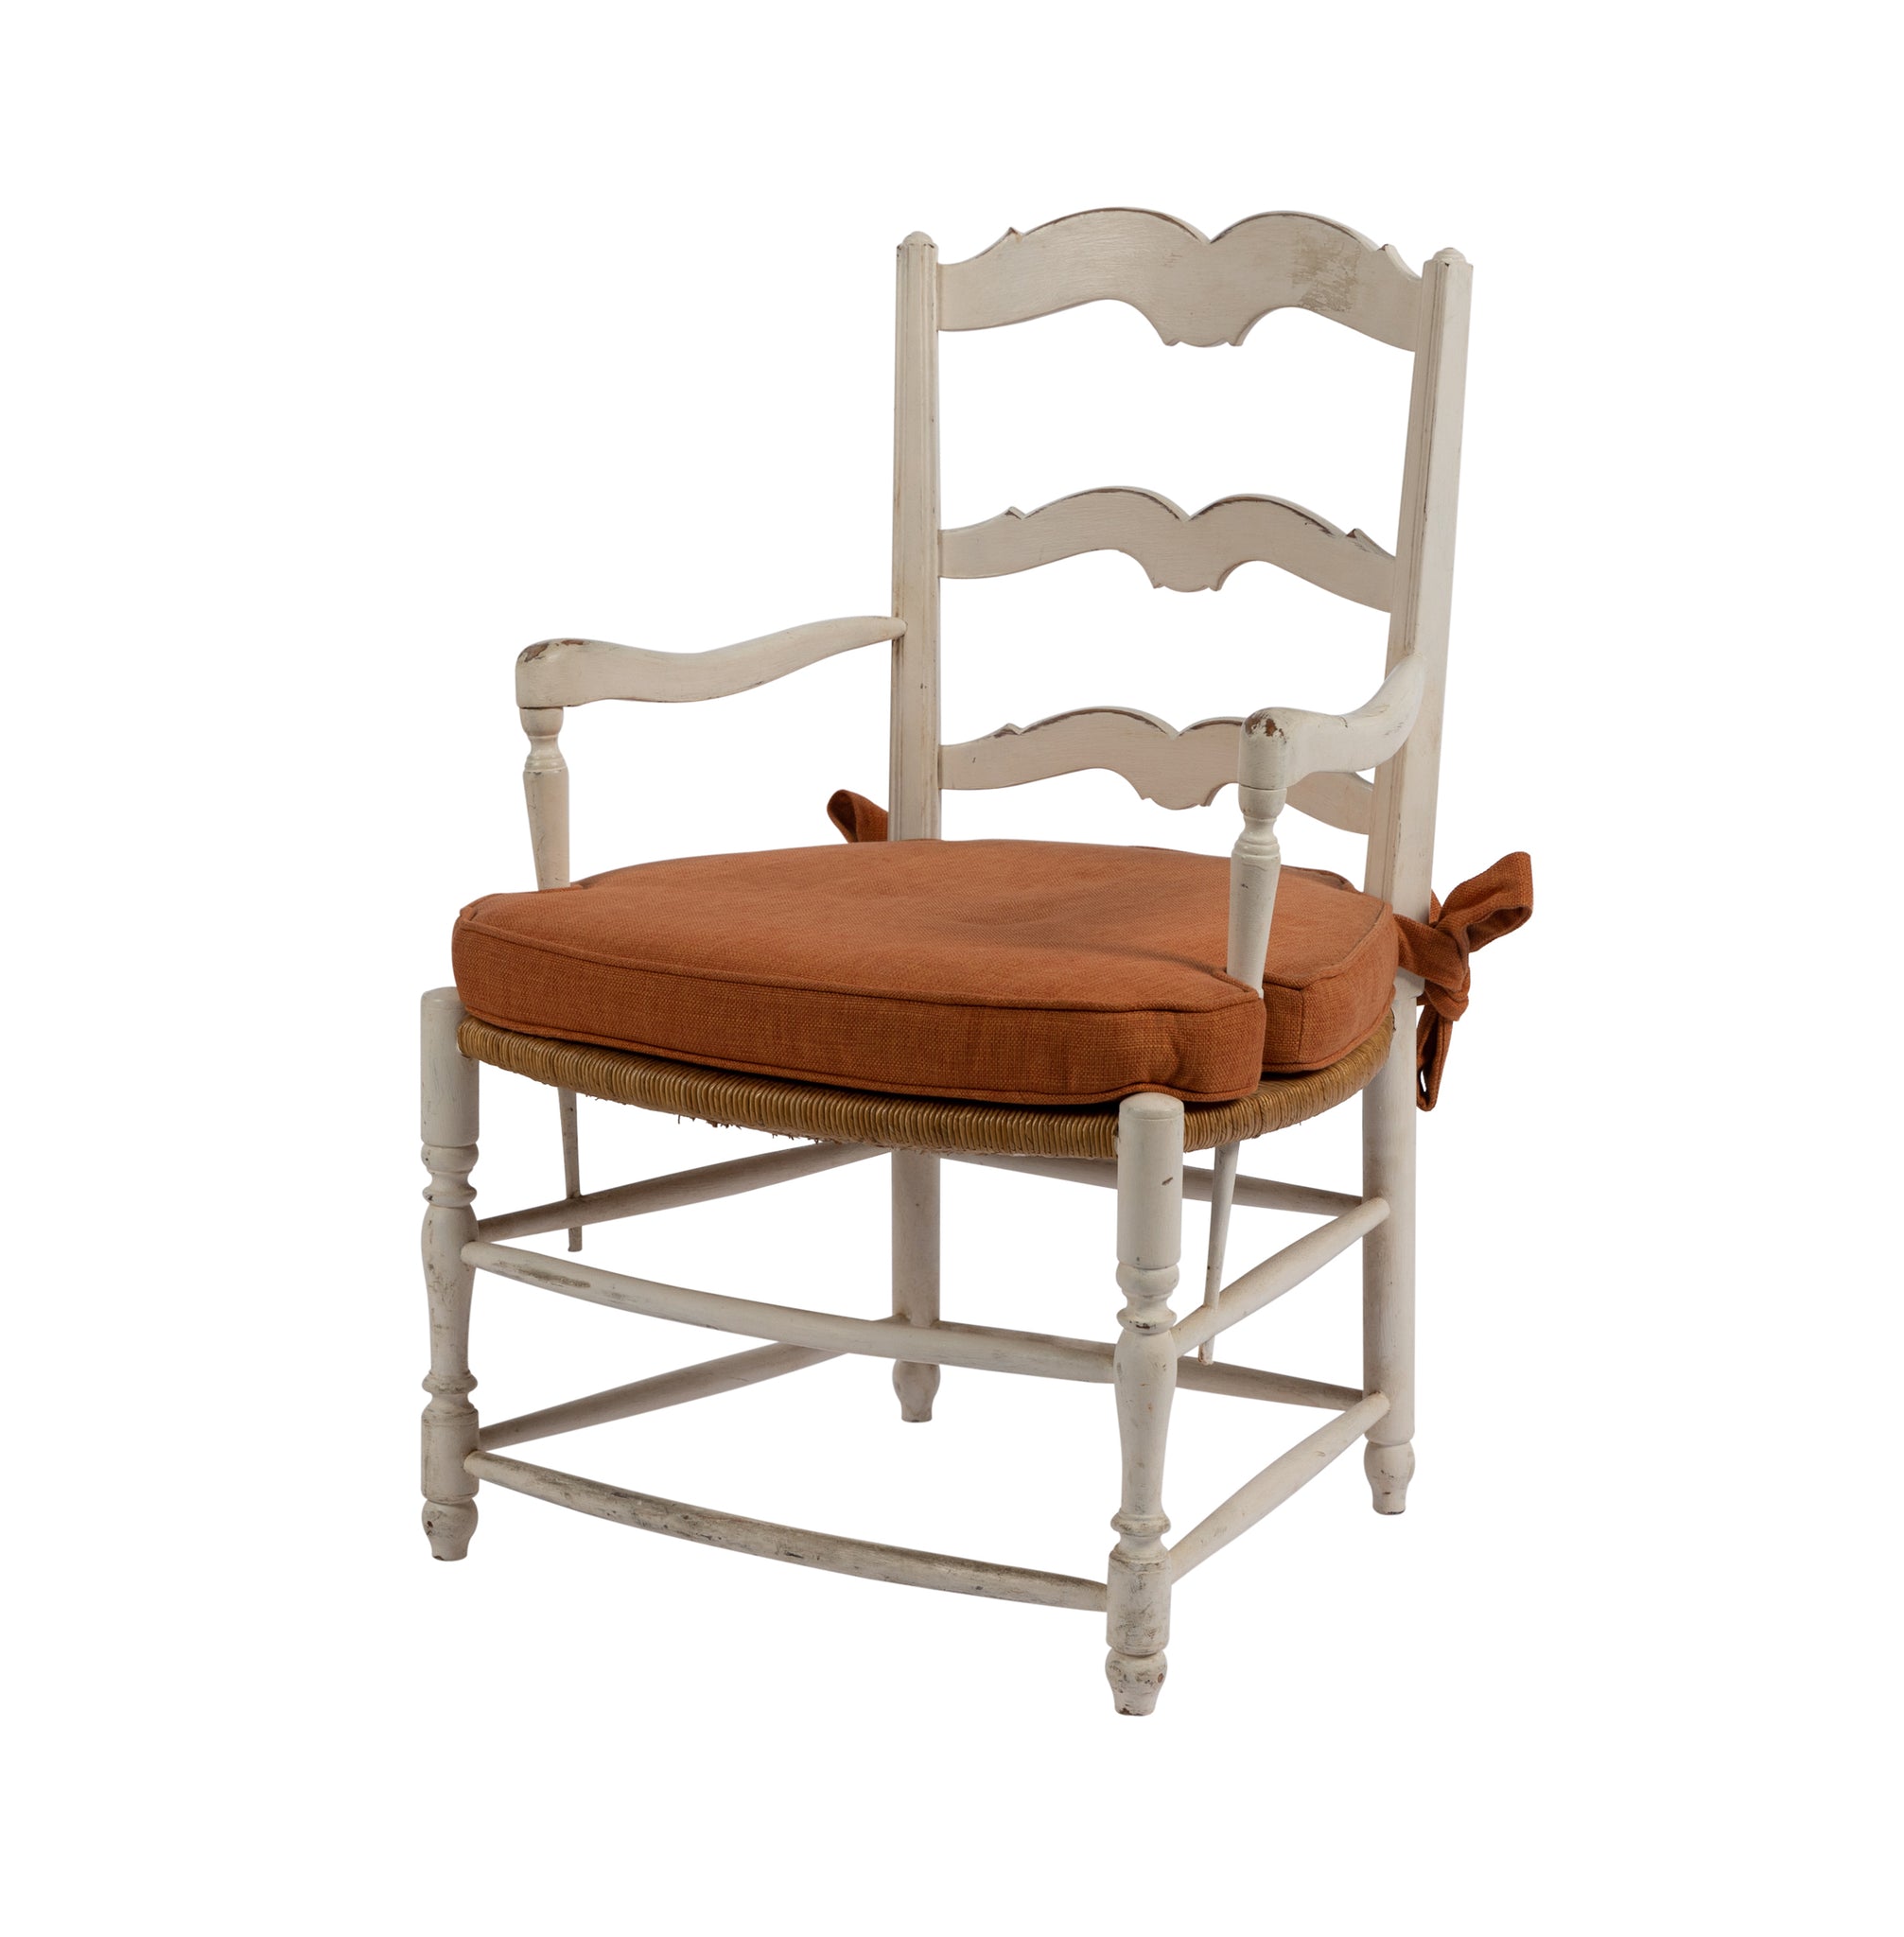 Gorgeous white ladderback armchair with rush seat and orange cushion from Provence